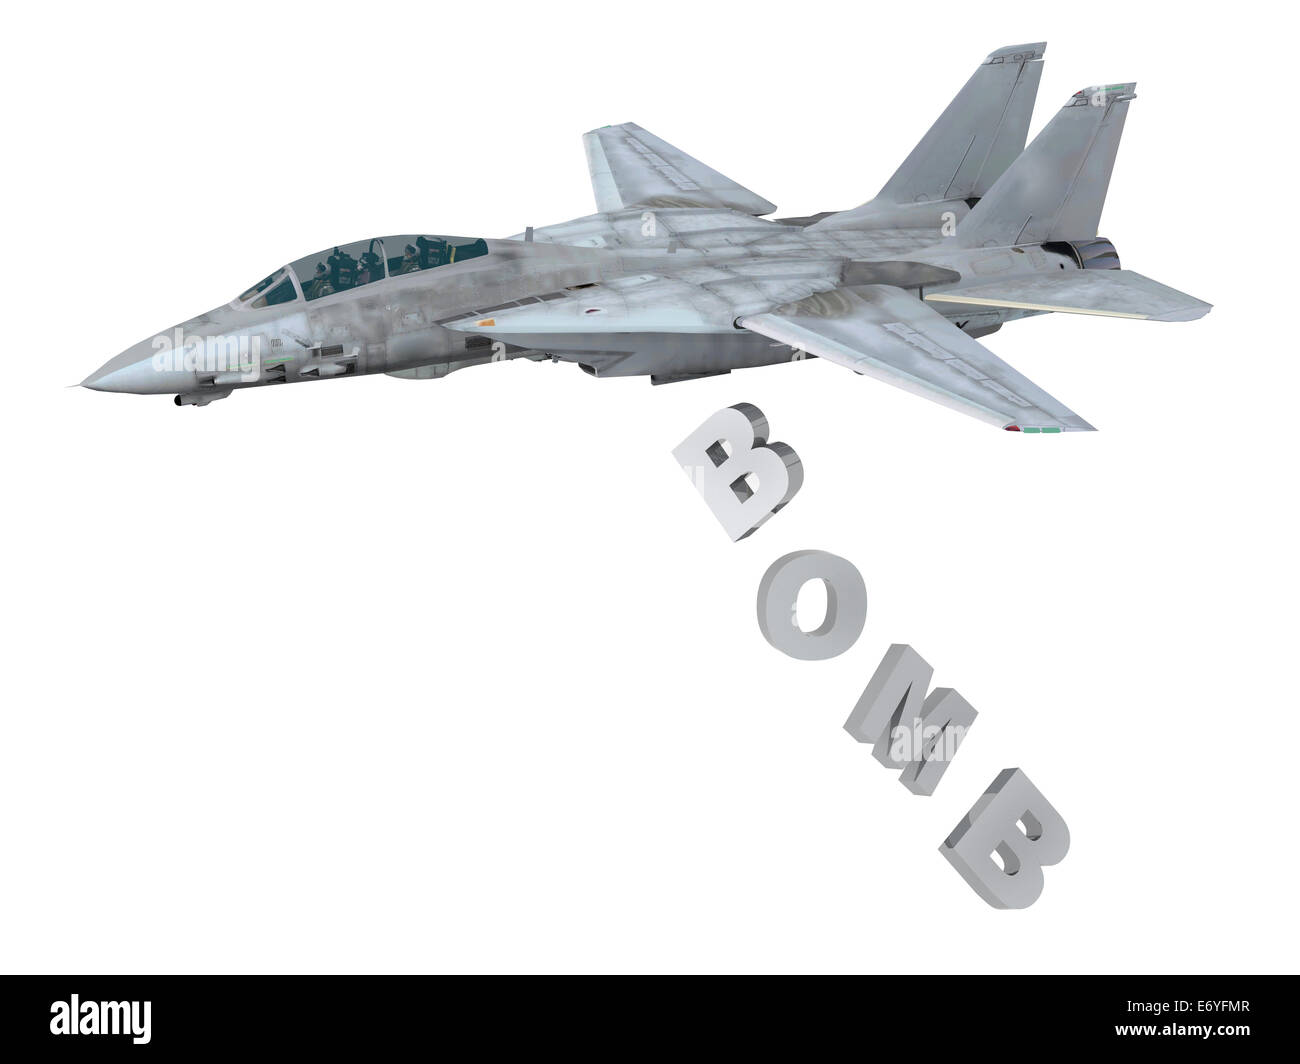 warplane launching letters instead of bombs, 3d illustration Stock Photo